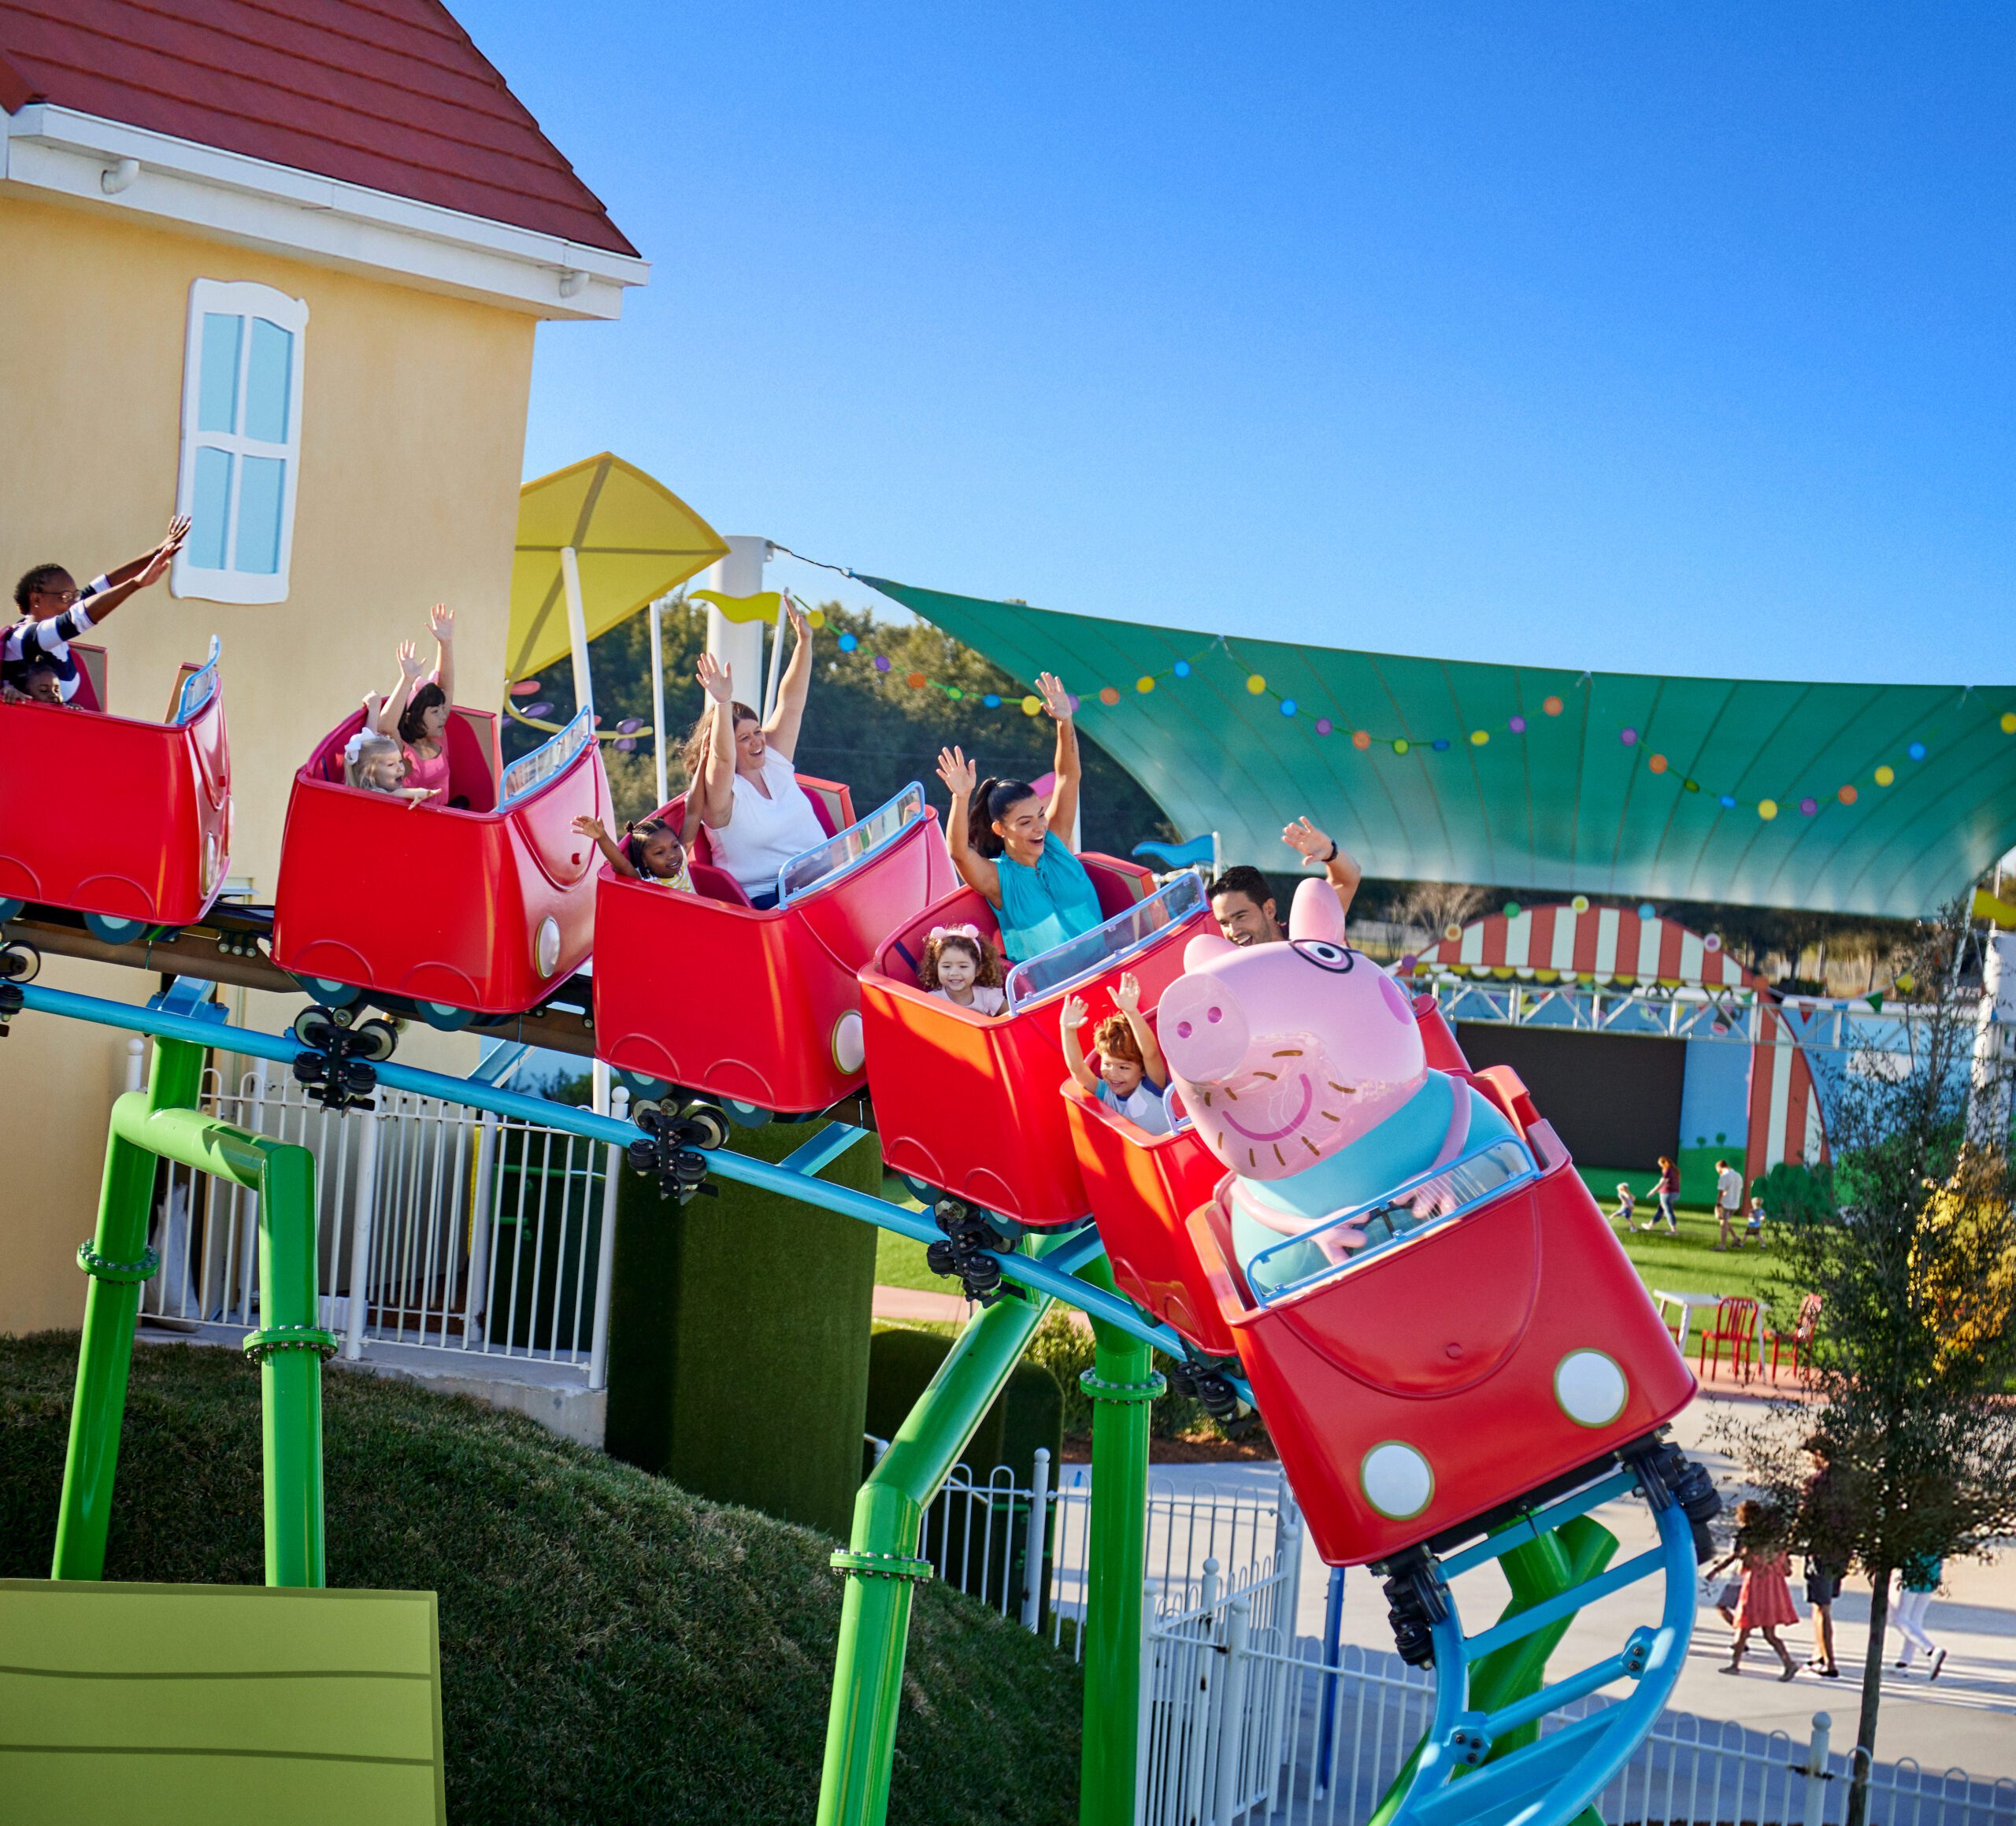 Kids and parents ride the red rollercoaster with their hands high